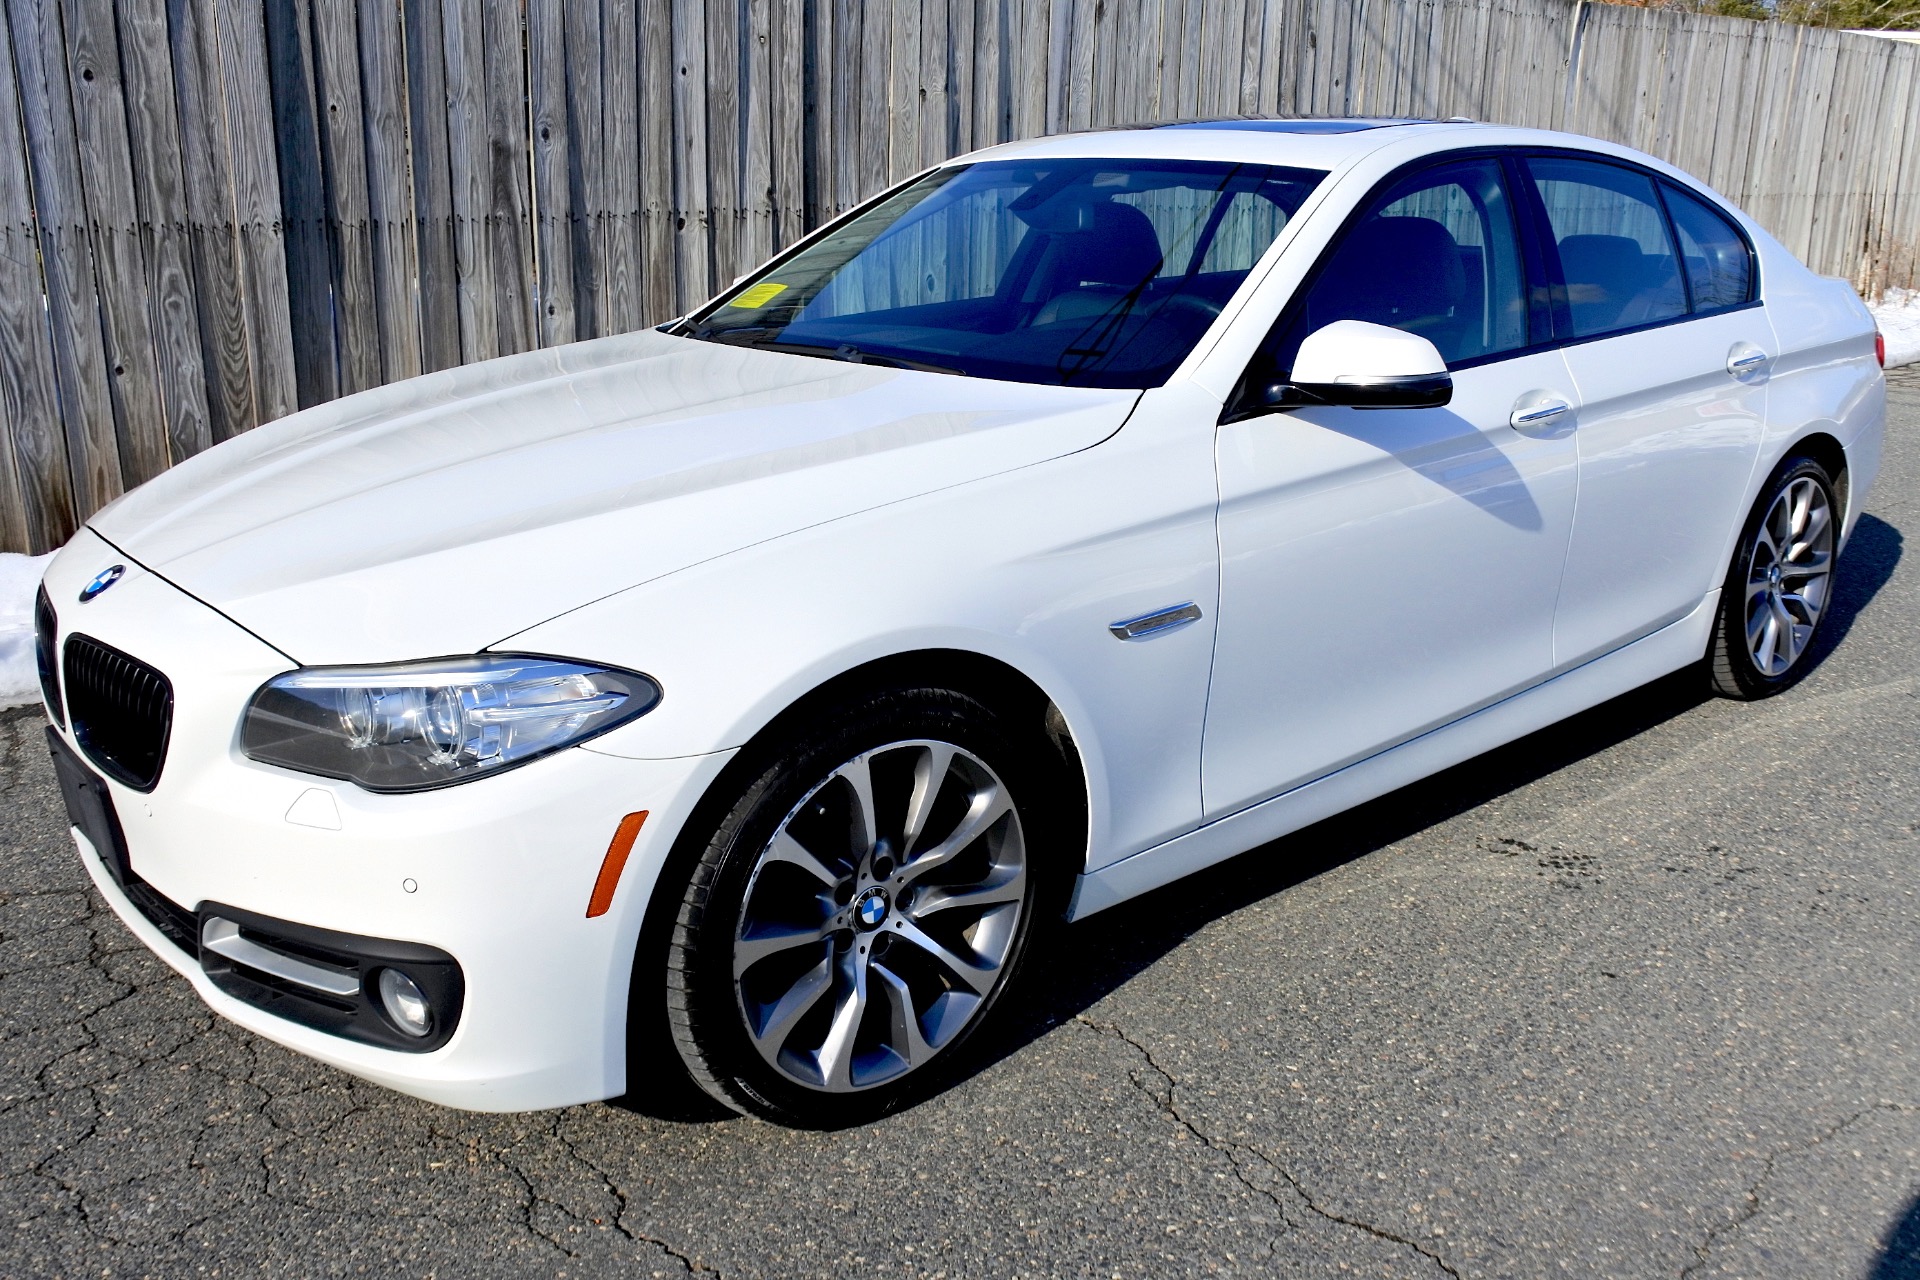 Used 16 Bmw 5 Series 528i Xdrive Awd For Sale 16 800 Metro West Motorcars Llc Stock